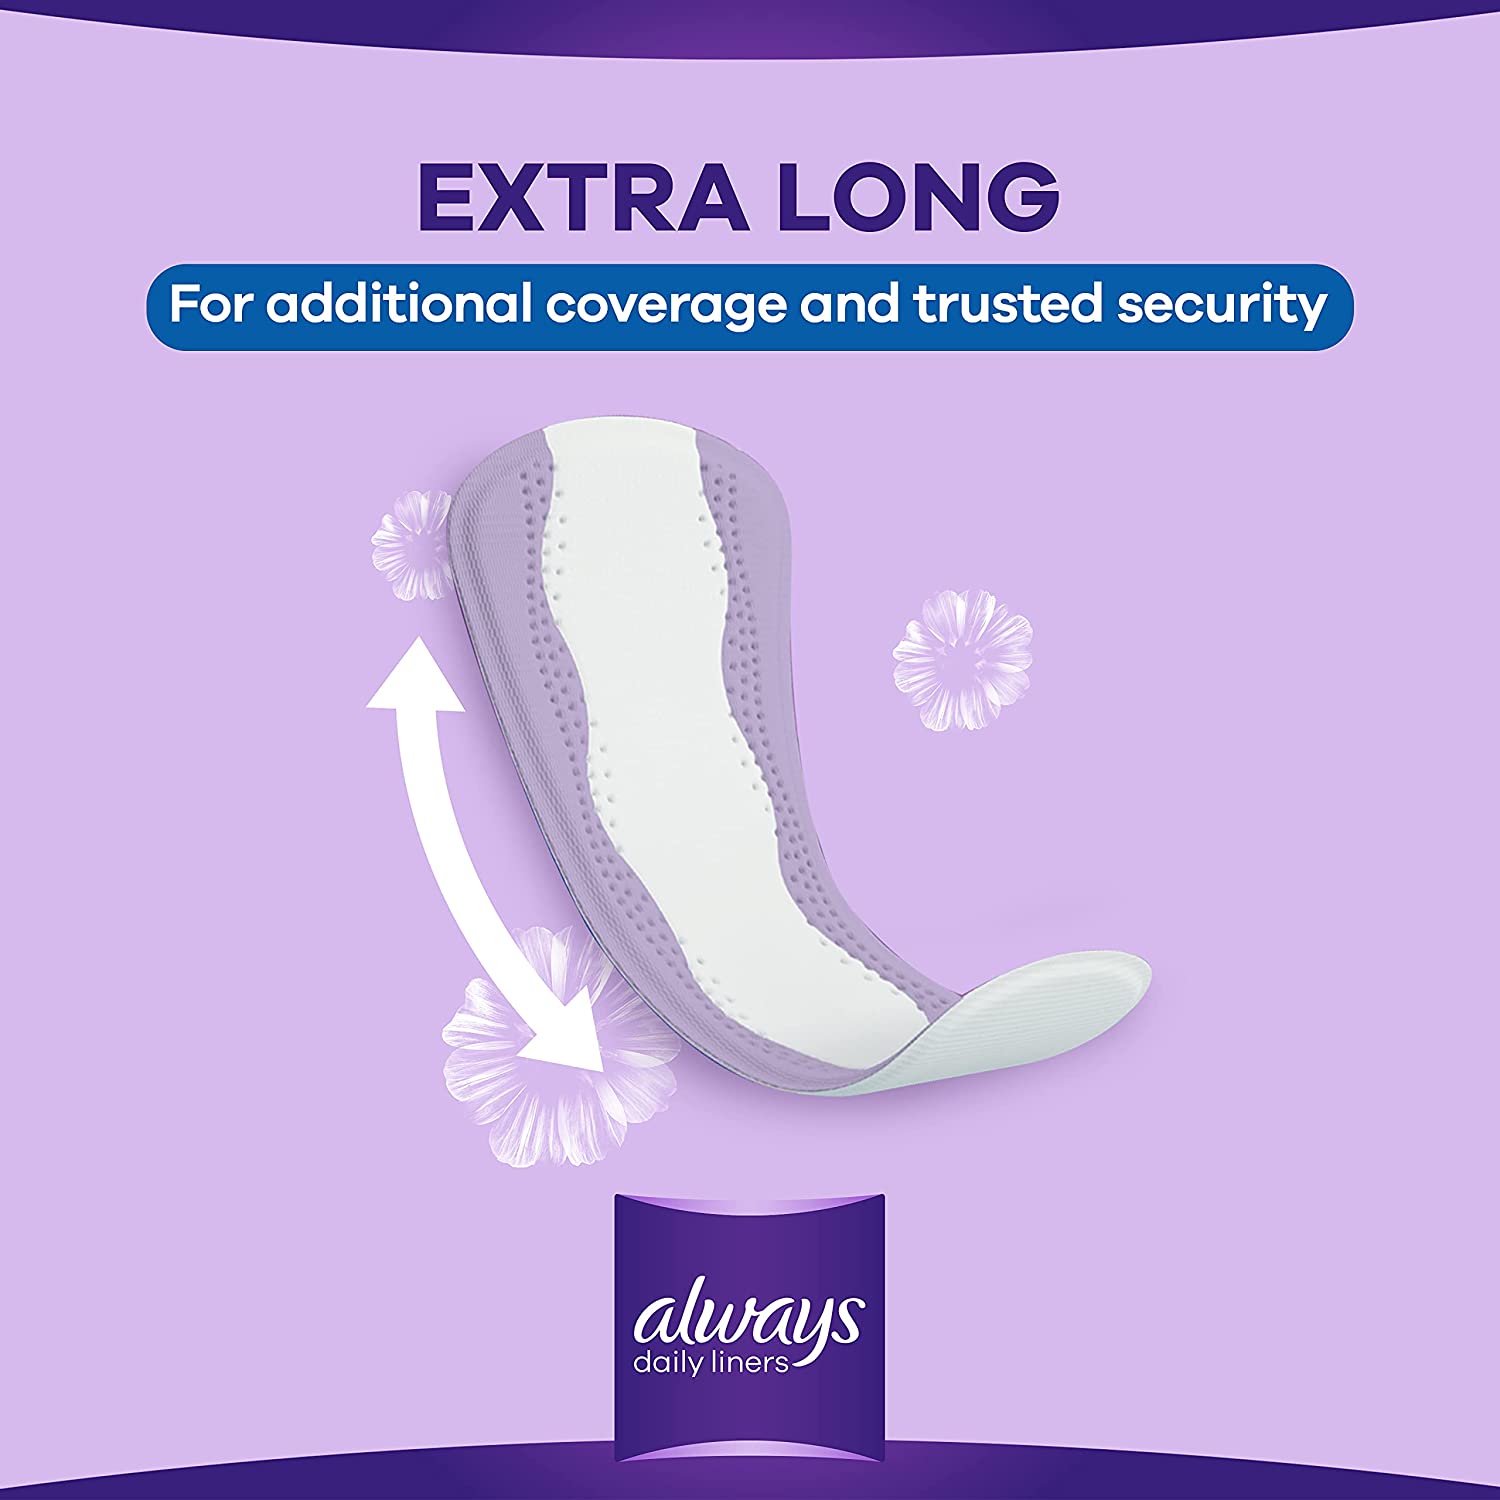 Always Daily Liners Extra Protect Pantyliners, Large, 48 Pcs